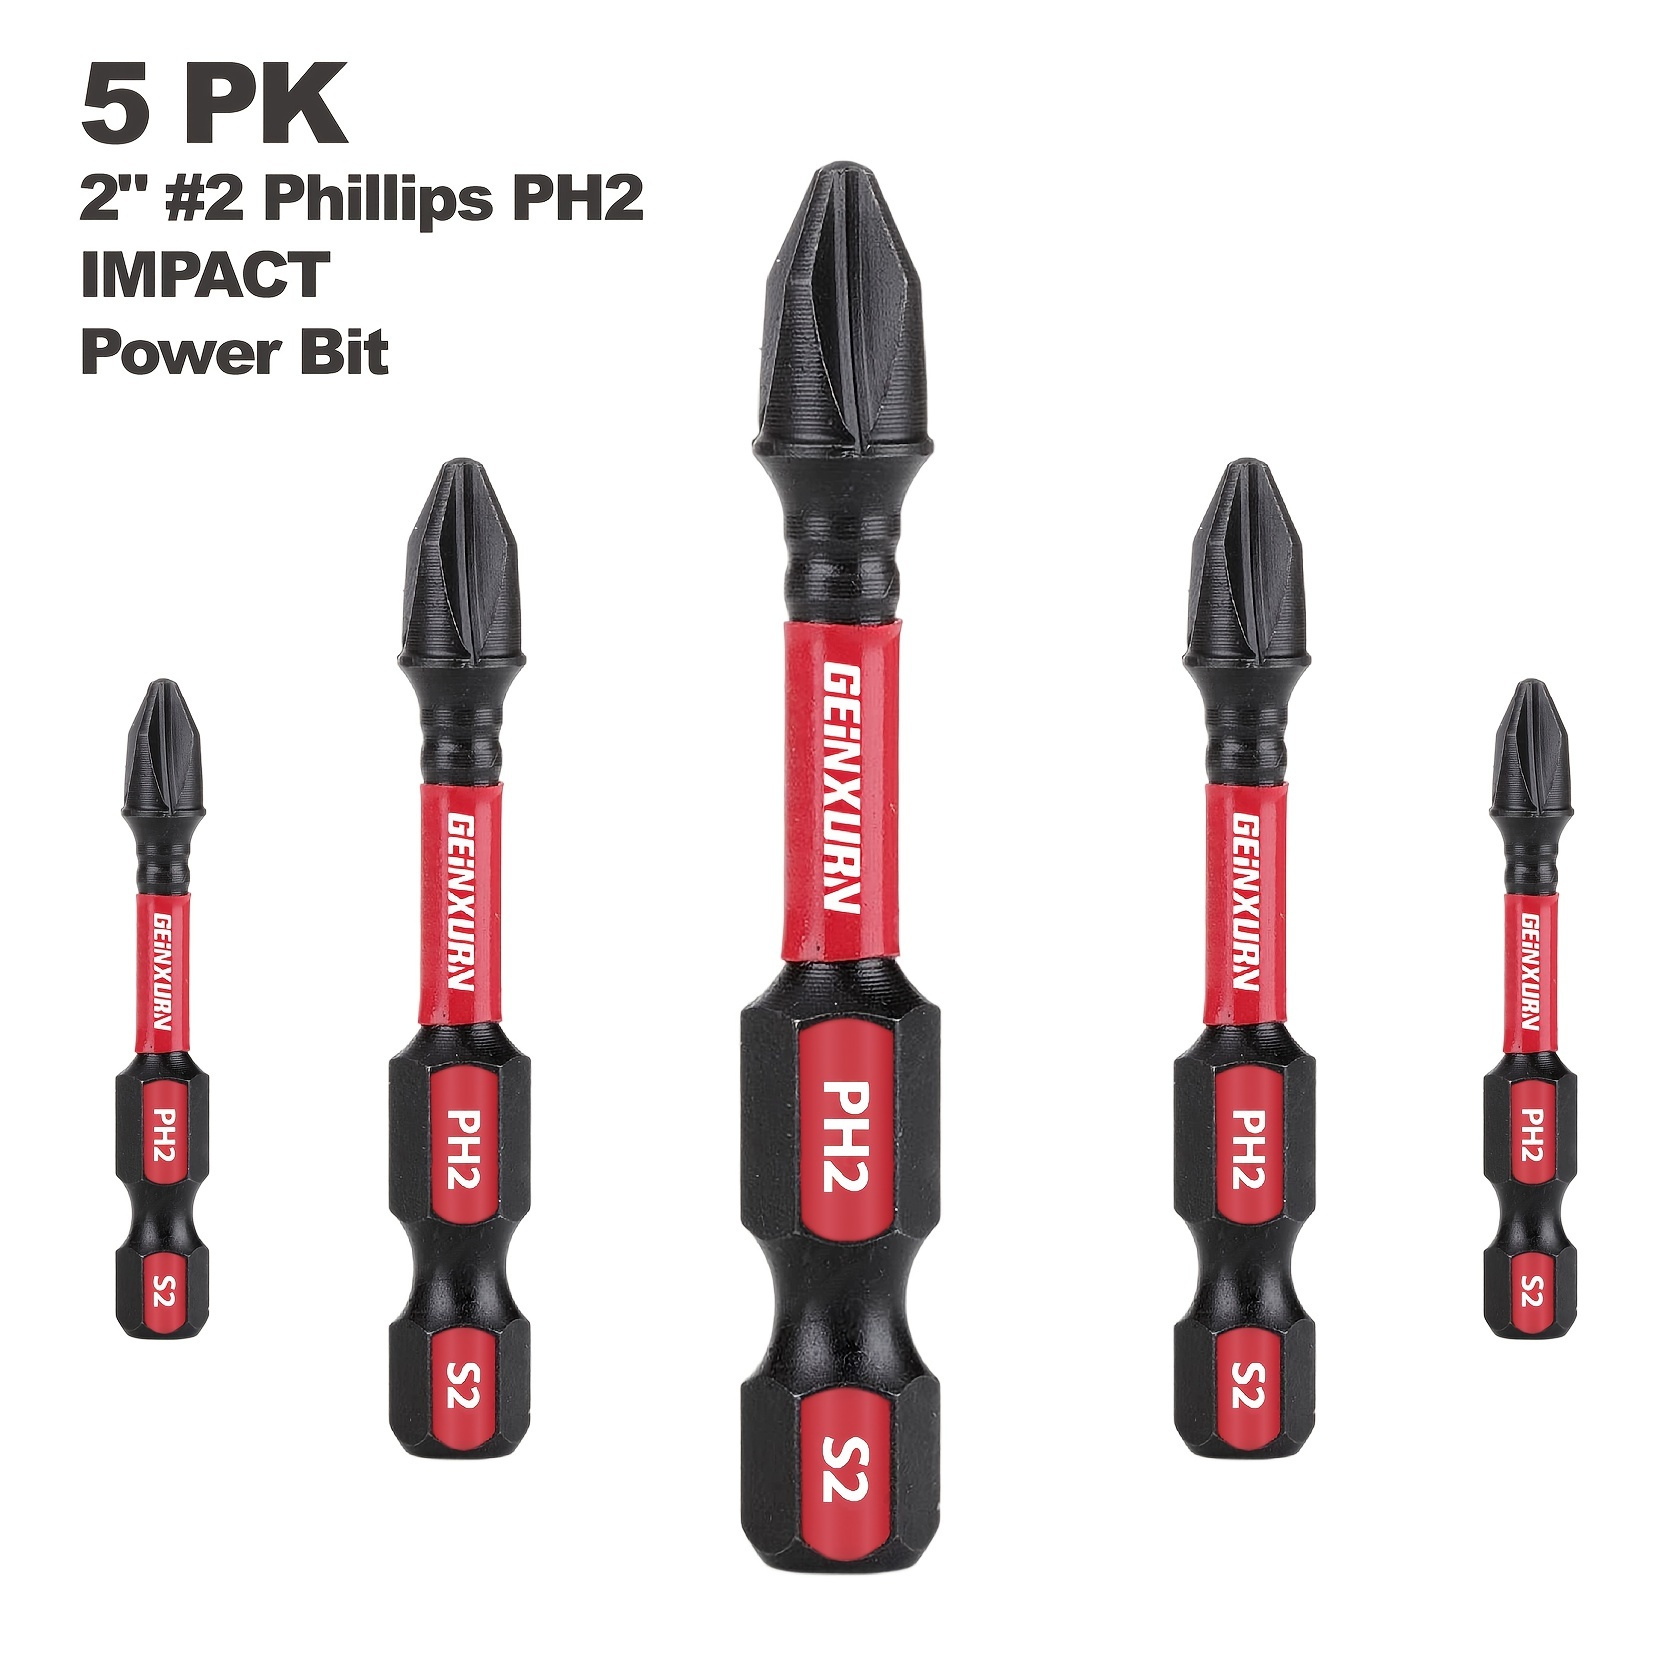 

5/10/20pcs 50mm/2inch Phillips Ph2 Impact Screwdriver Bit, For Plastic Products, Woodwork Articles, Metal Works In Family, Factory, Office Etc.